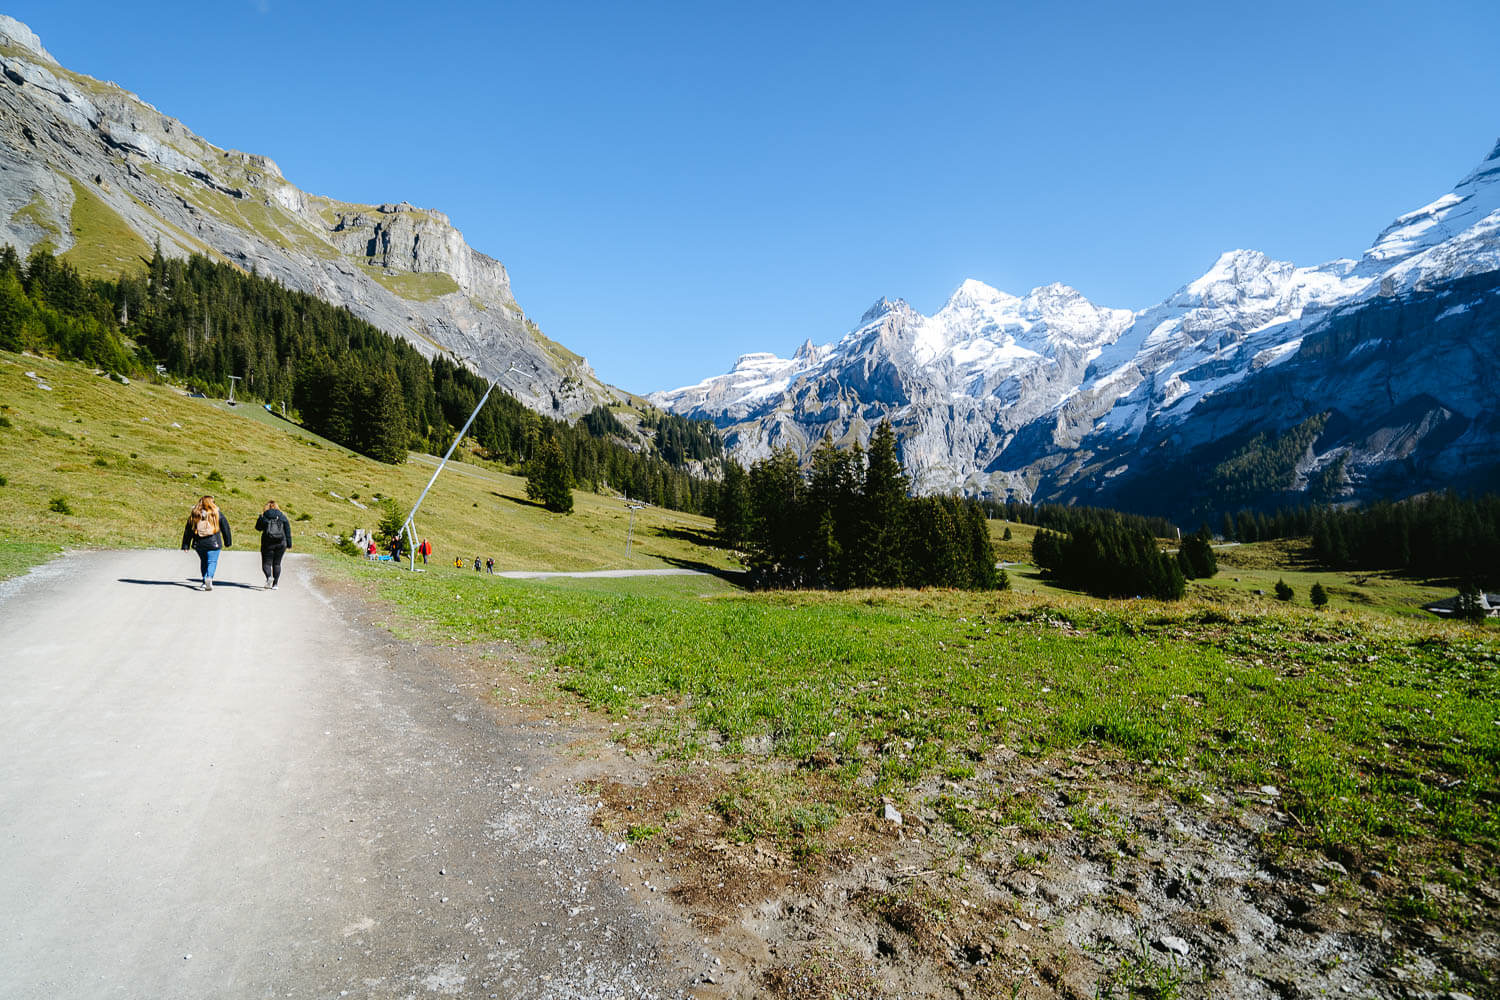 The hiking trail right after arriving at the Oeschinensee cable car station